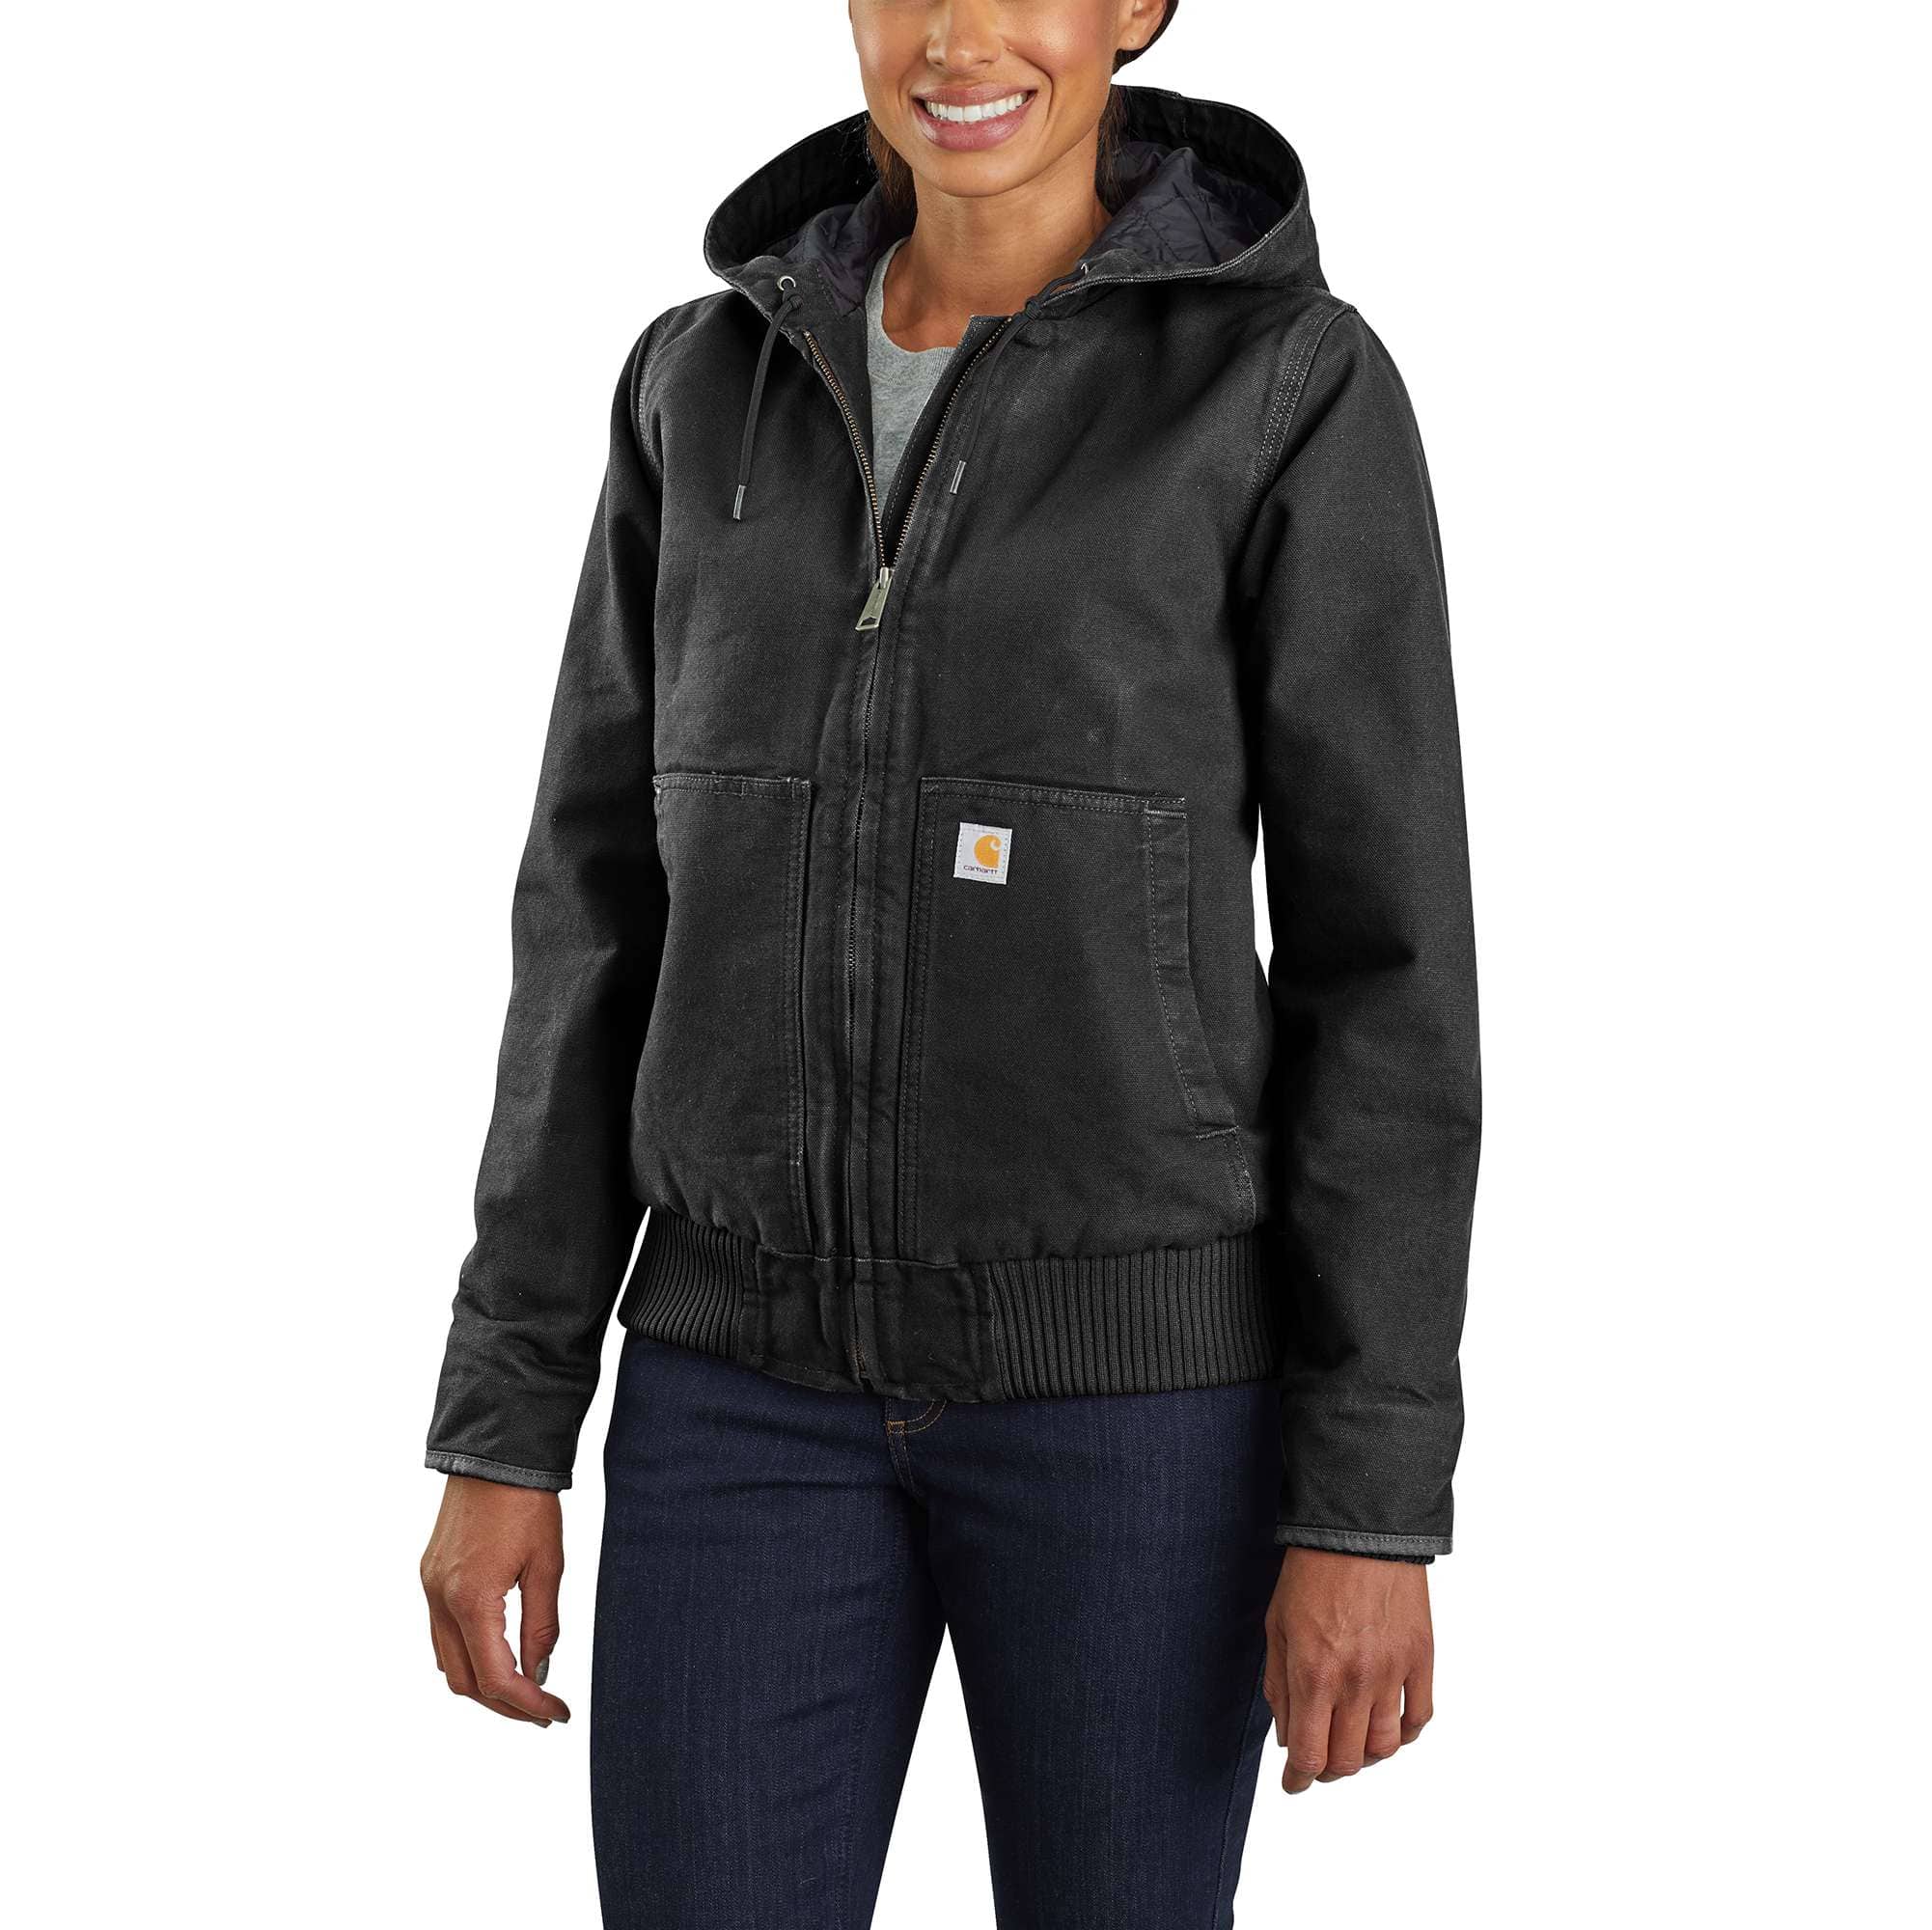 Carhartt Women's Washed Duck Loose Fit Insulated Active Jacket with Hood